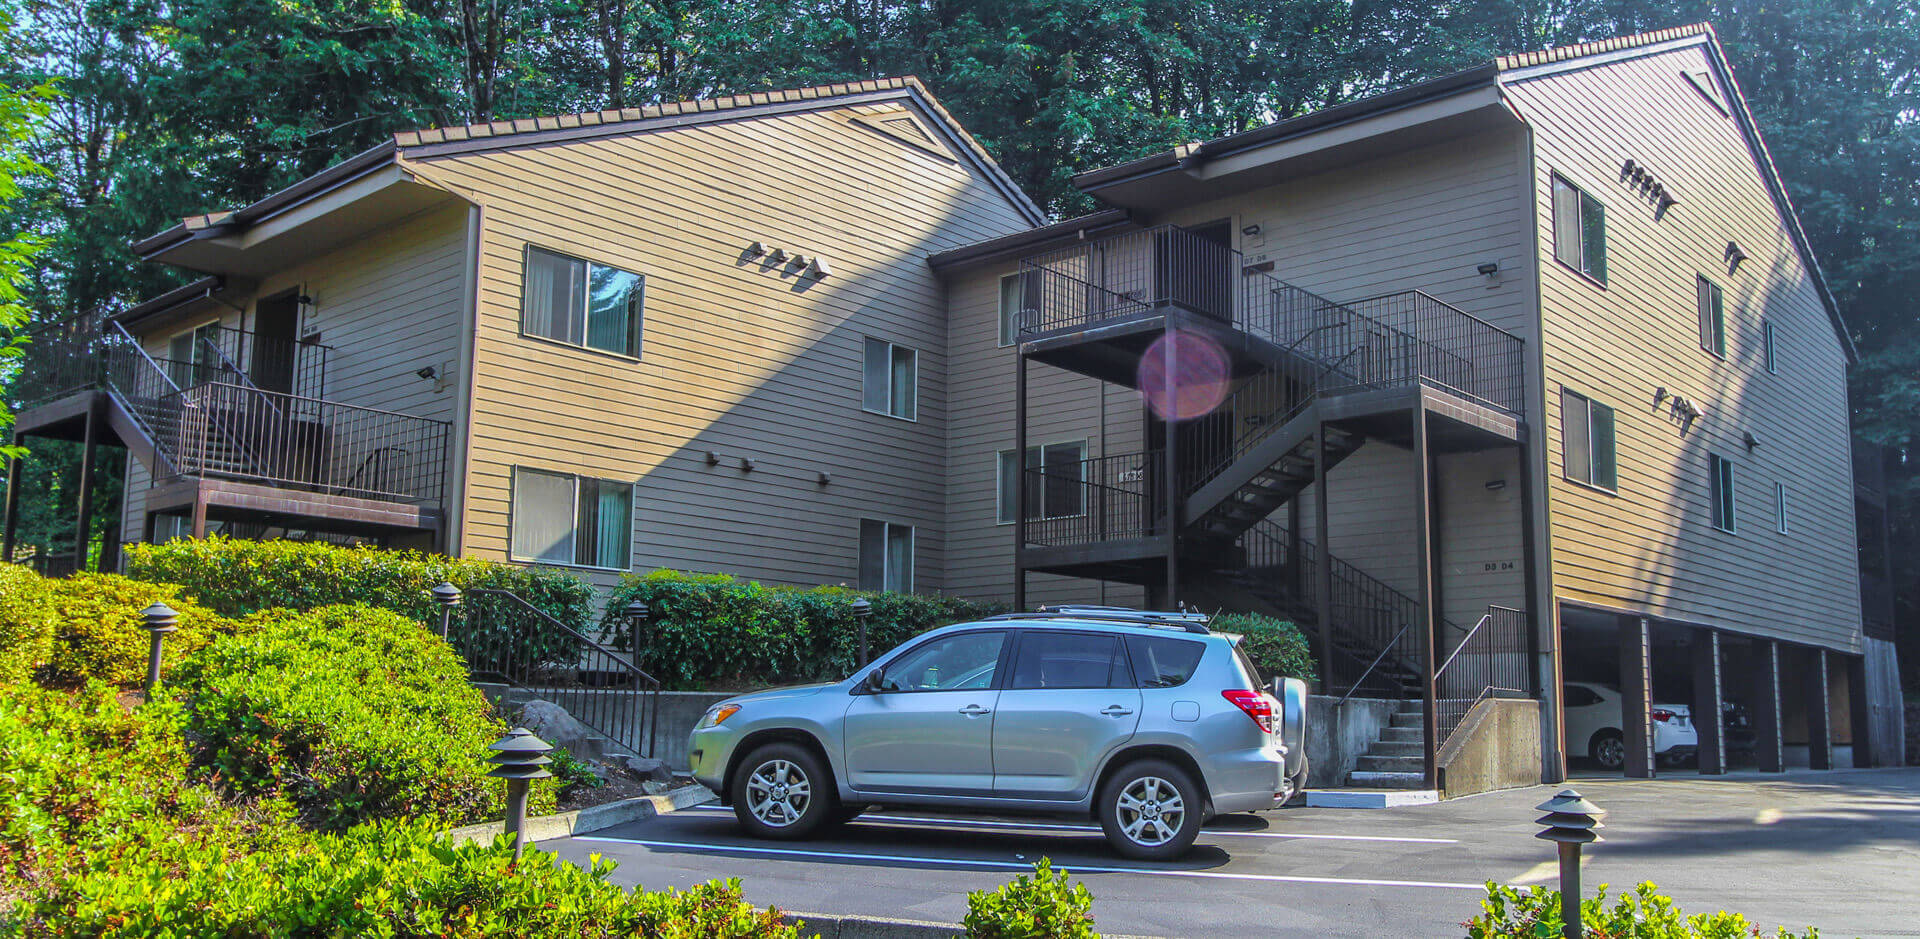 An exterior building view at VRI's Whispering Woods Resort in Oregon.